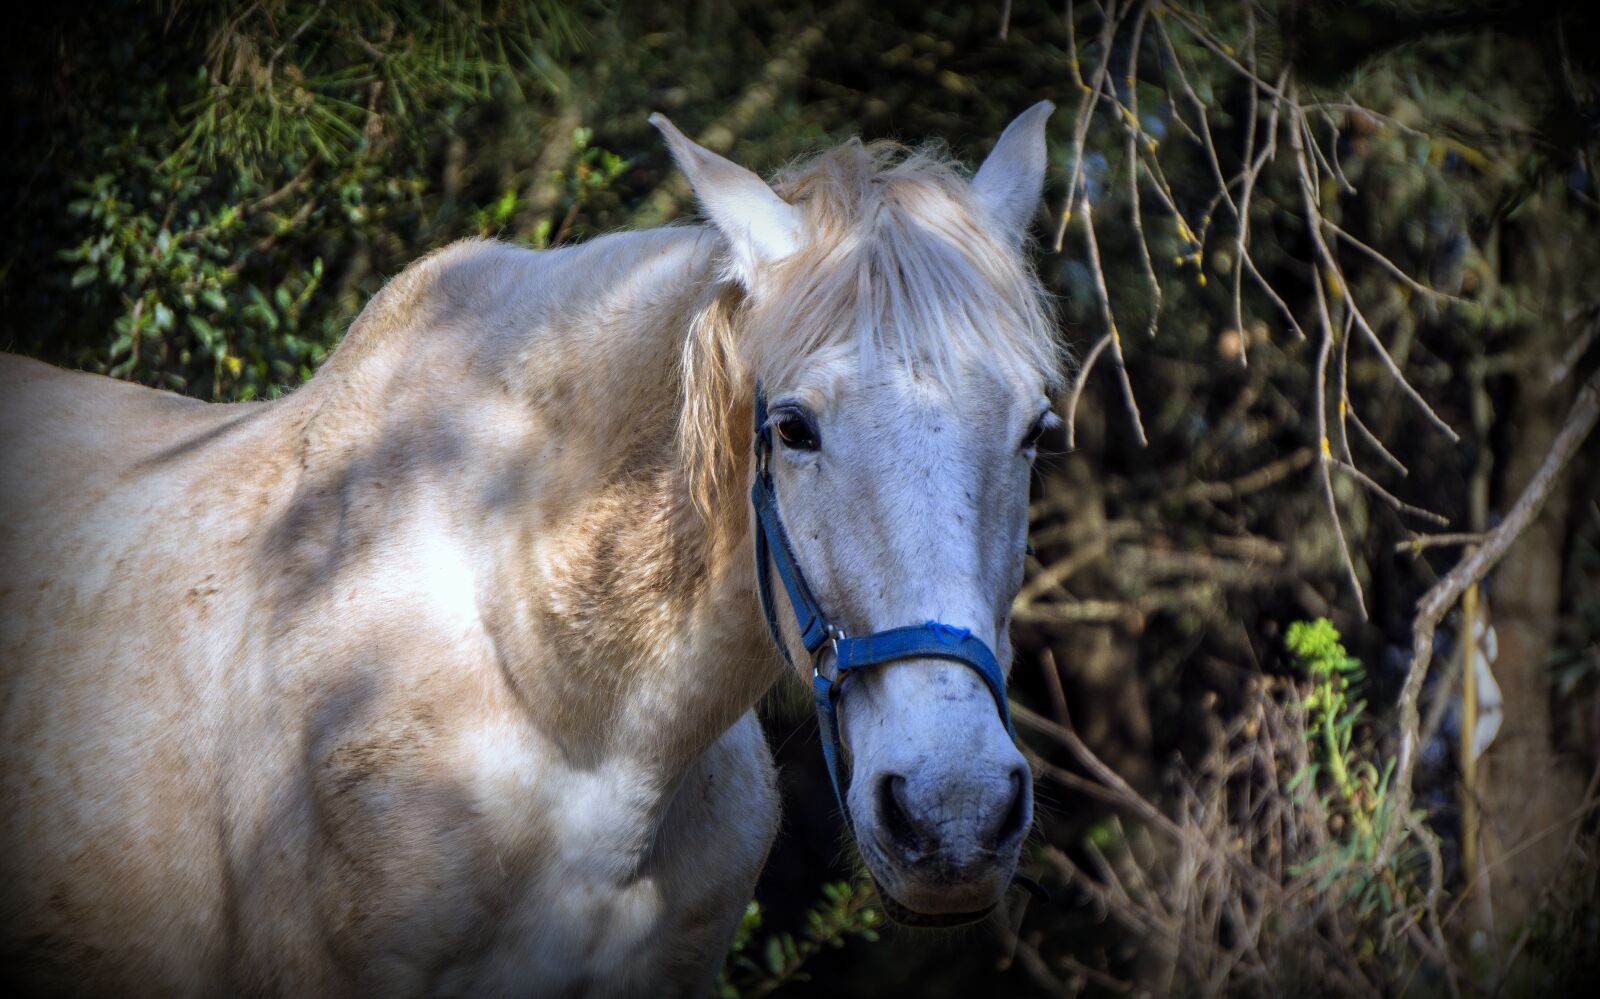 Sony a6000 sample photo. Horse, equine, equestrian photography